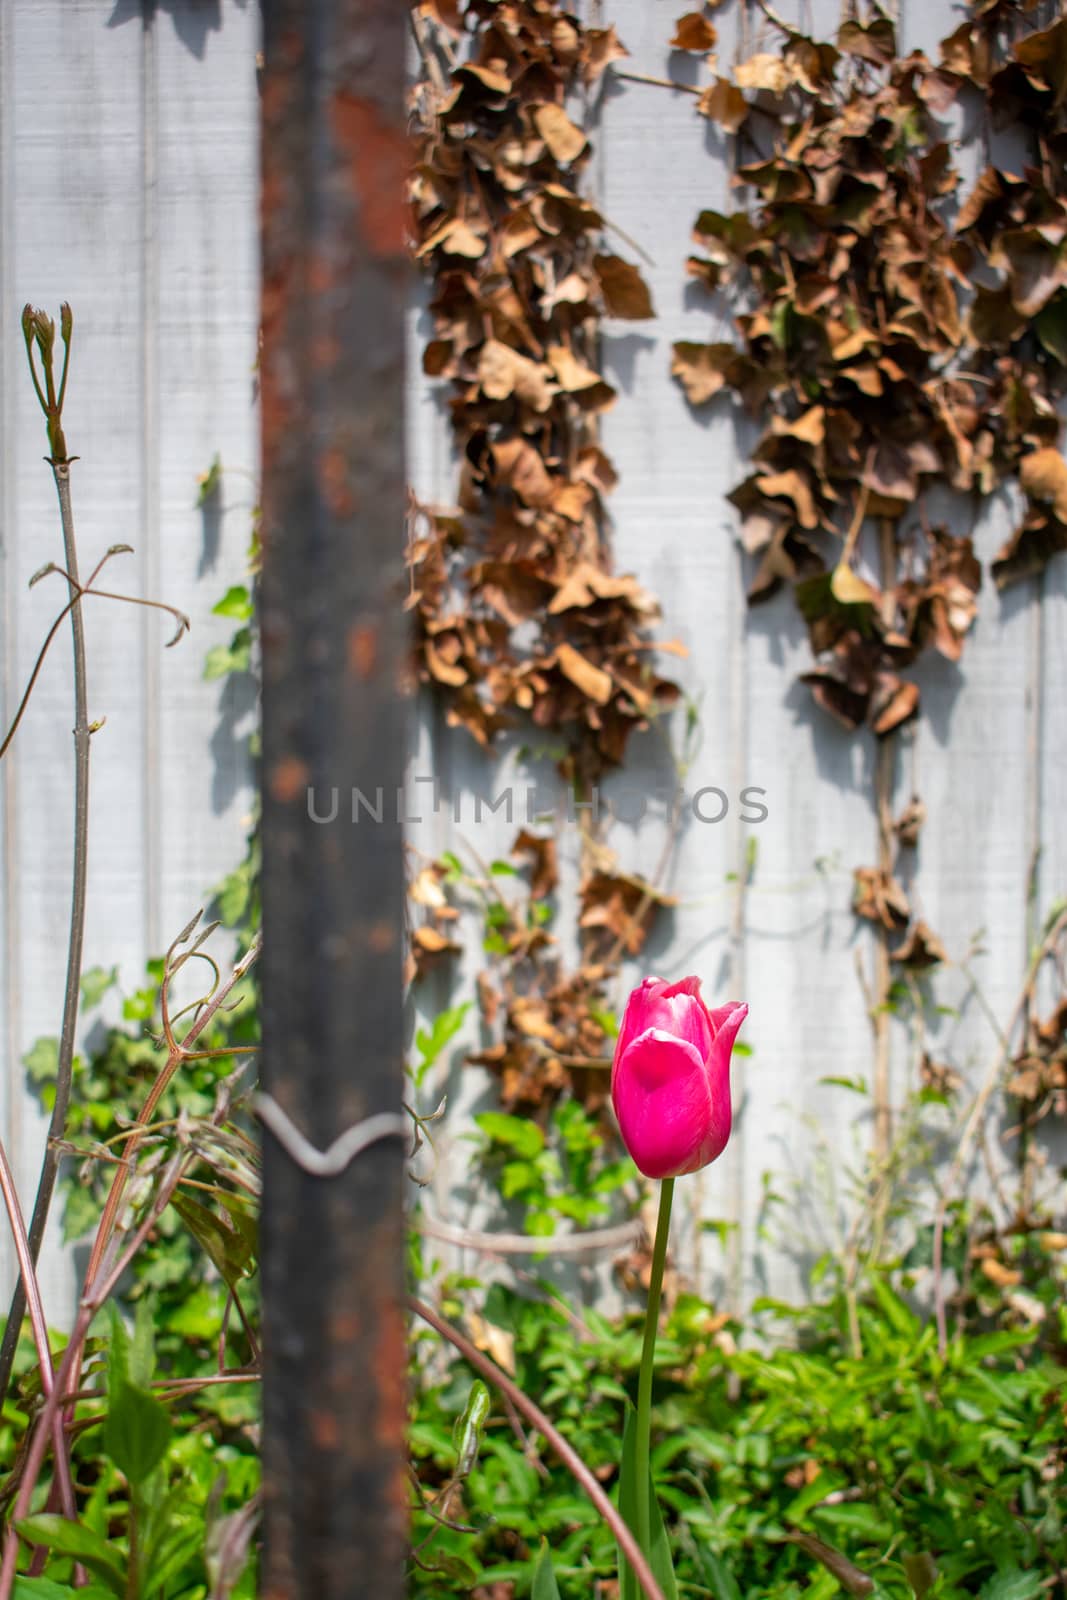 A Single Red Tulip Behind a Metal Fence With a Wall Covered in D by bju12290